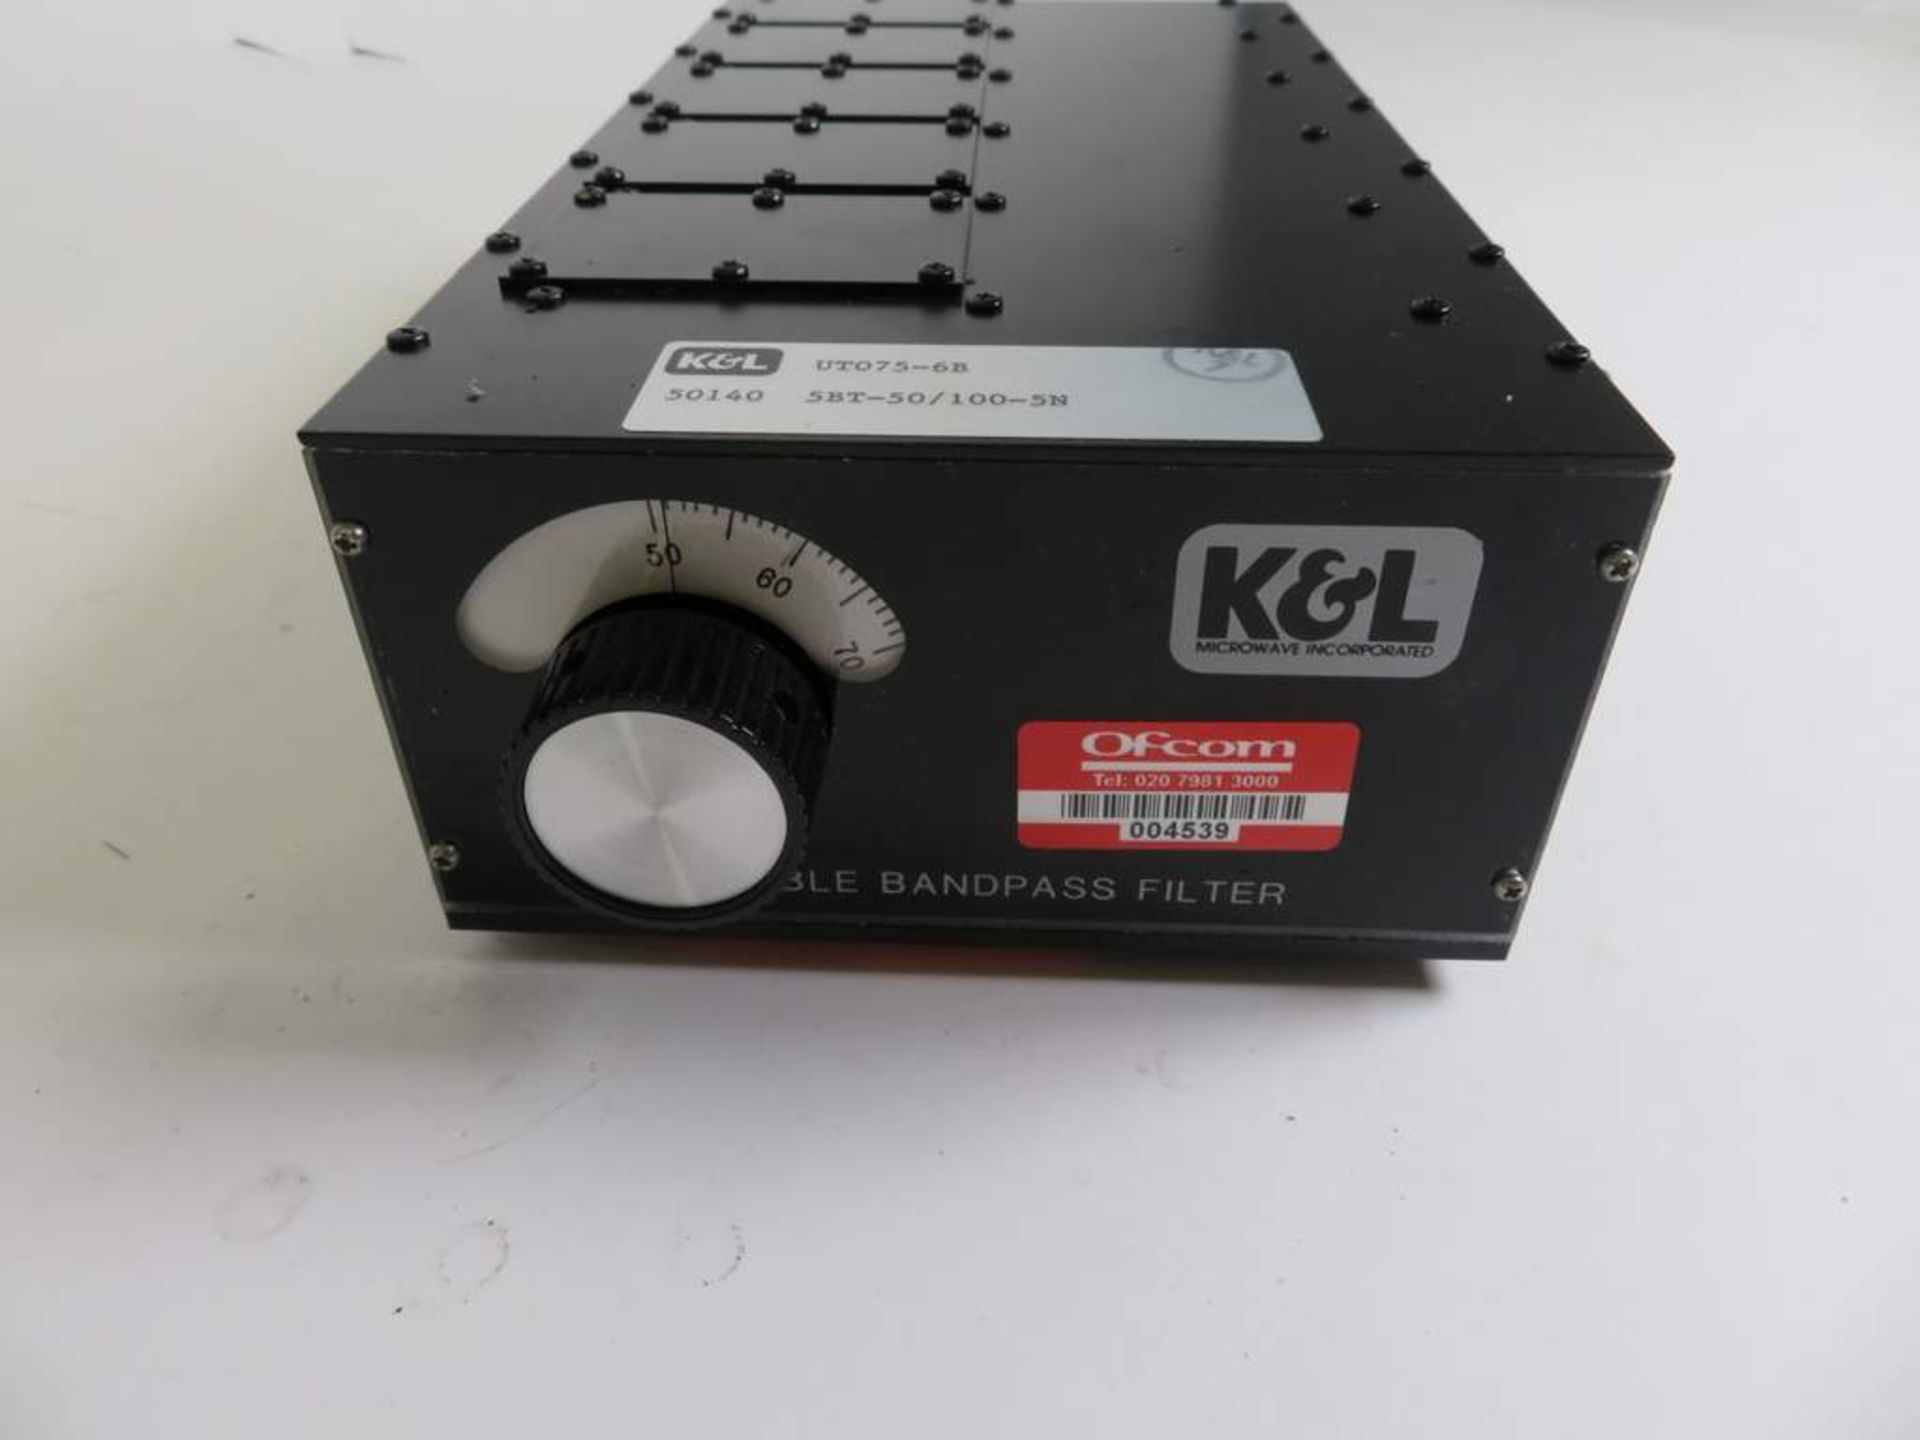 K&L 5BT-50/100-5N Tunable Bandpass Filter - Image 2 of 4